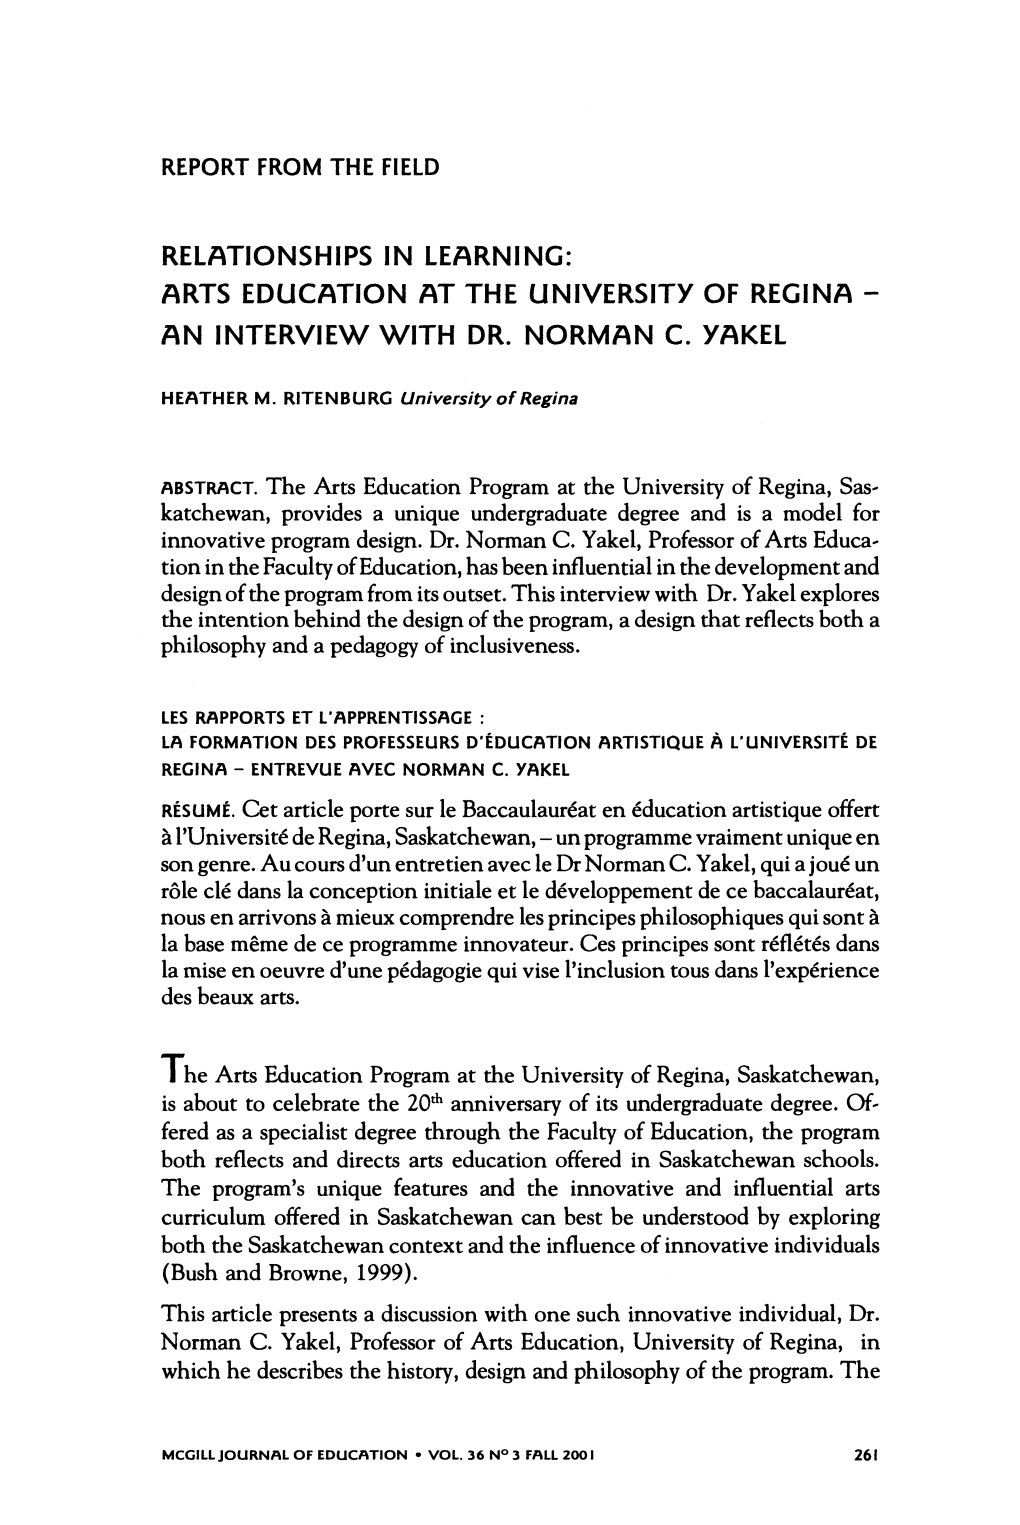 Relationships in Learning: Arts Education at the University of Regina - an Interview with Dr